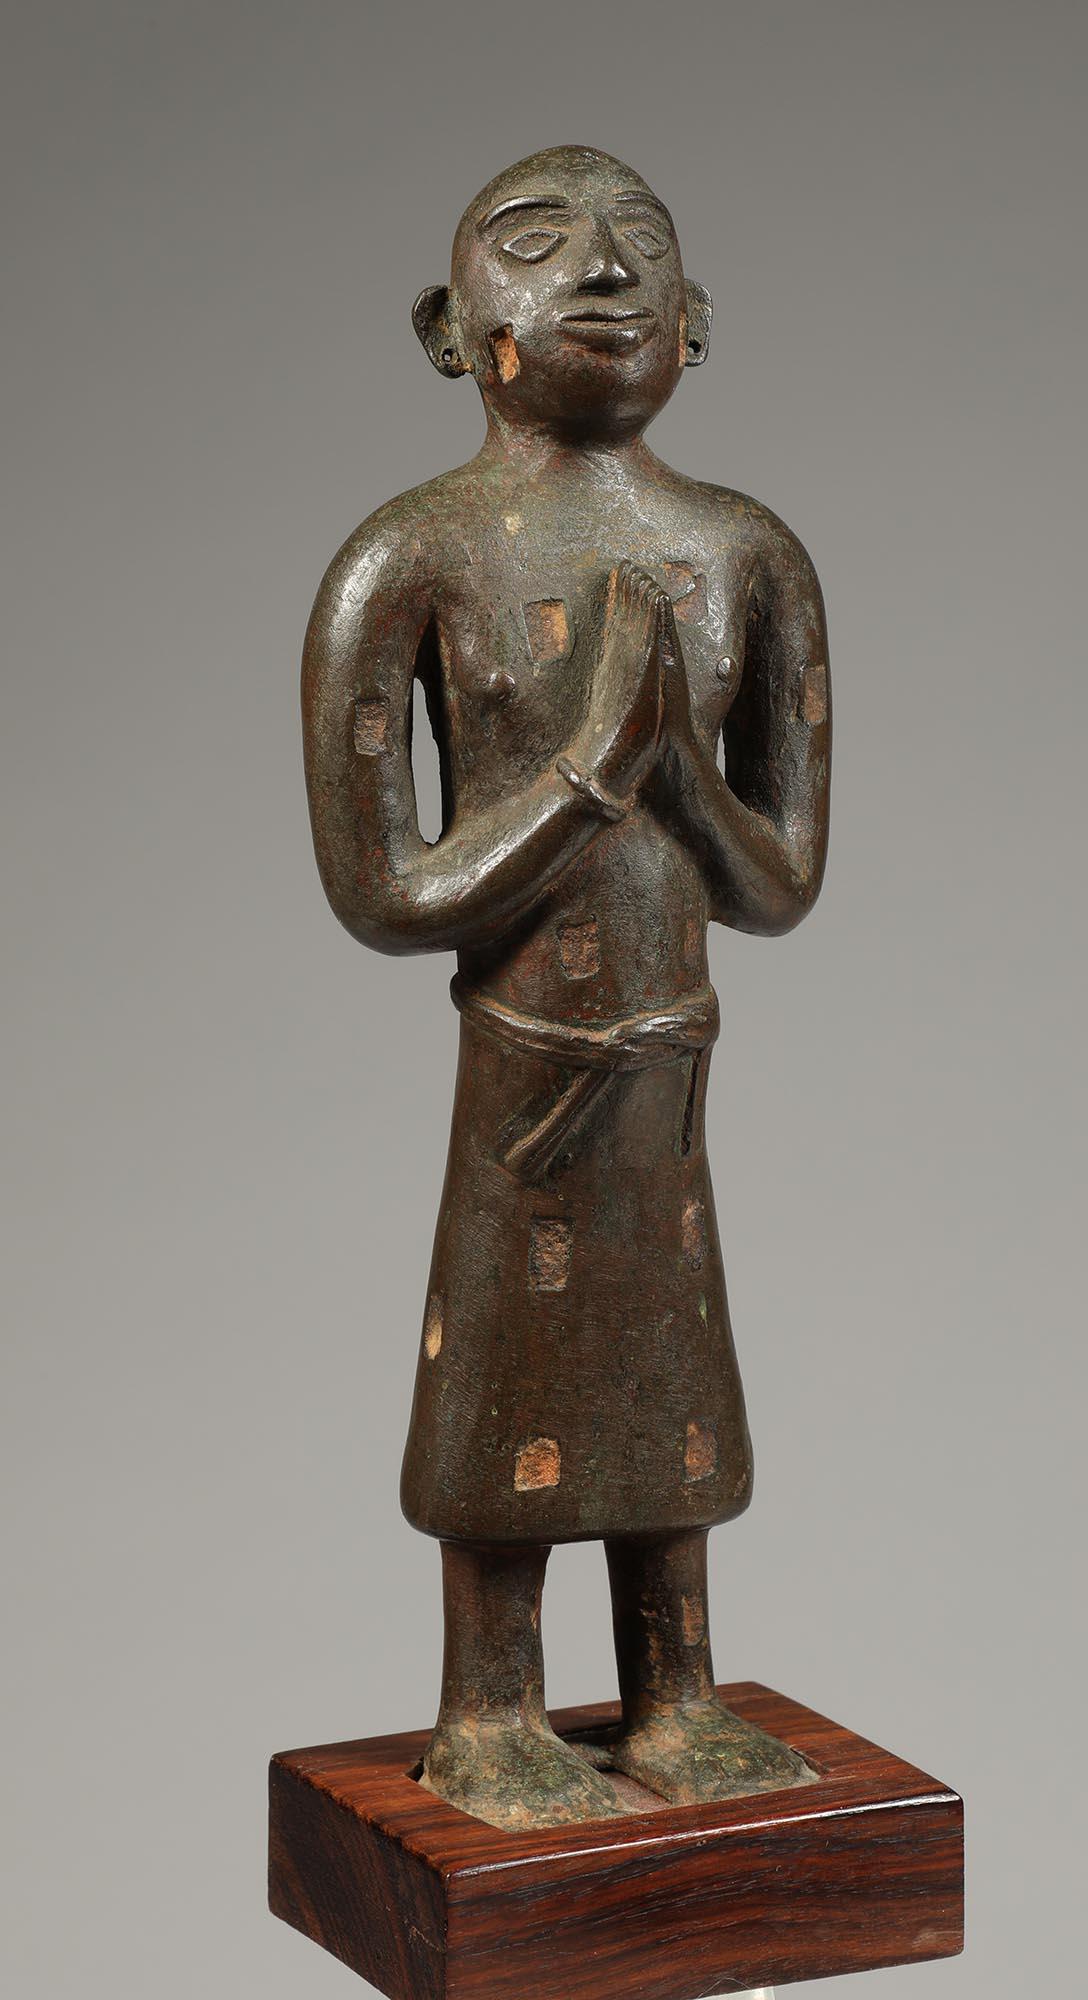 Old Nepal or India solid cast bronze standing namaste figure with hand clasped on chest. Sweet open eye expression and ears pierced for earrings (now missing). Series of rectangular openings that probably one held semi-precious stones or other metal